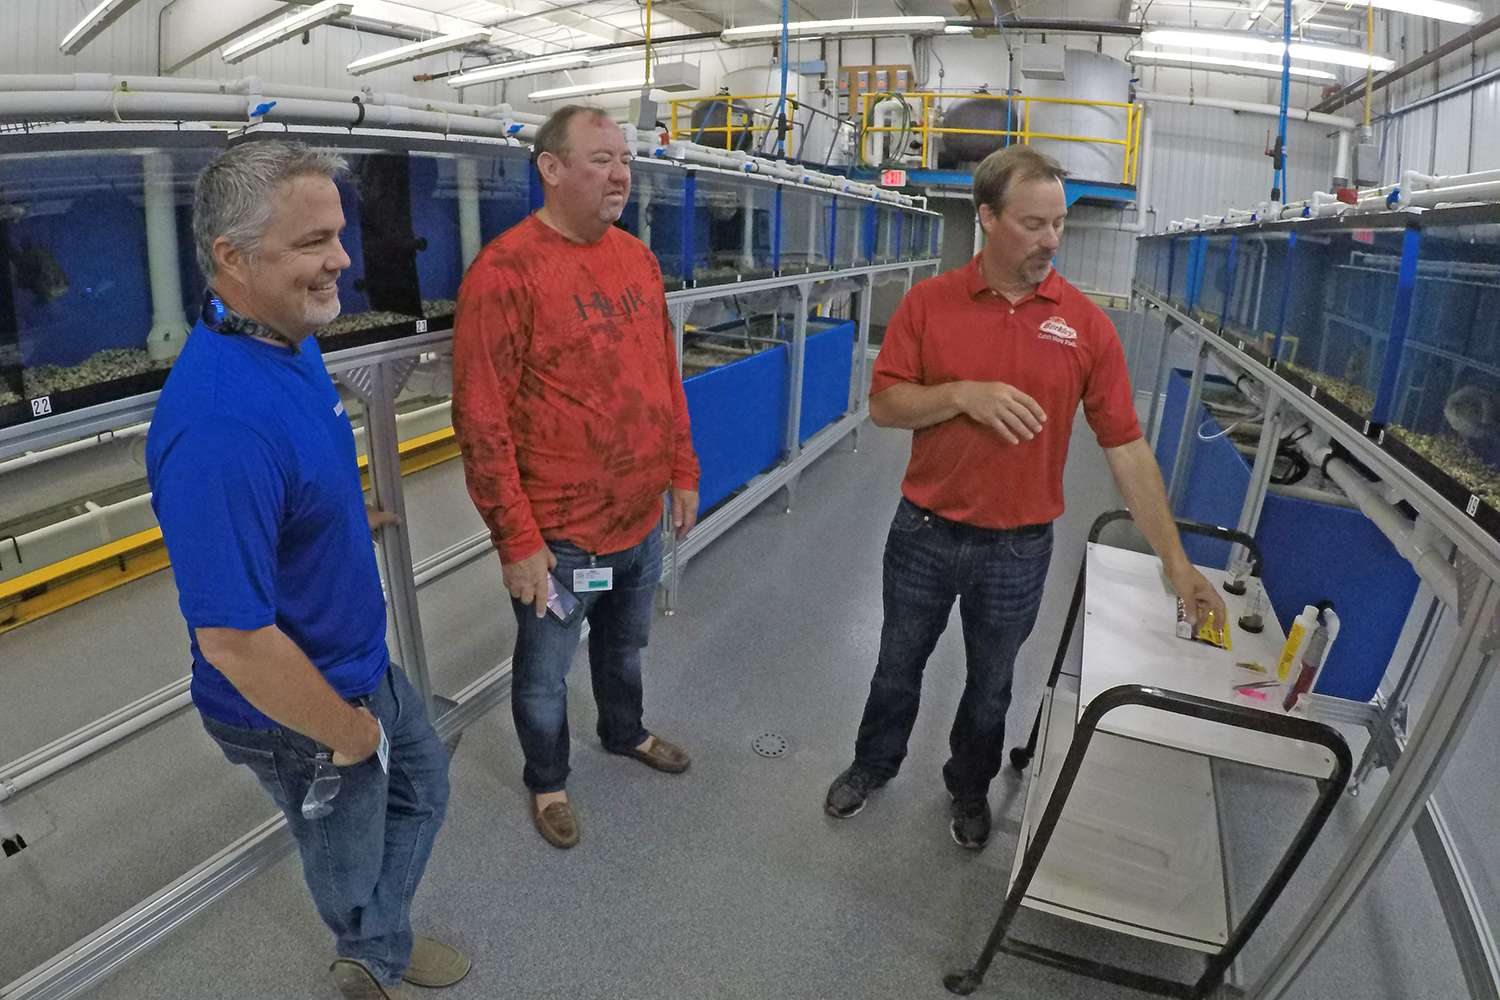 Now we move into the testing facility. James Hall on the far left is joined by B.A.S.S. CEO Bruce Akin and legendary angler and bait tester Mark Sexton on the right. Mark has the best job in the world, period. 